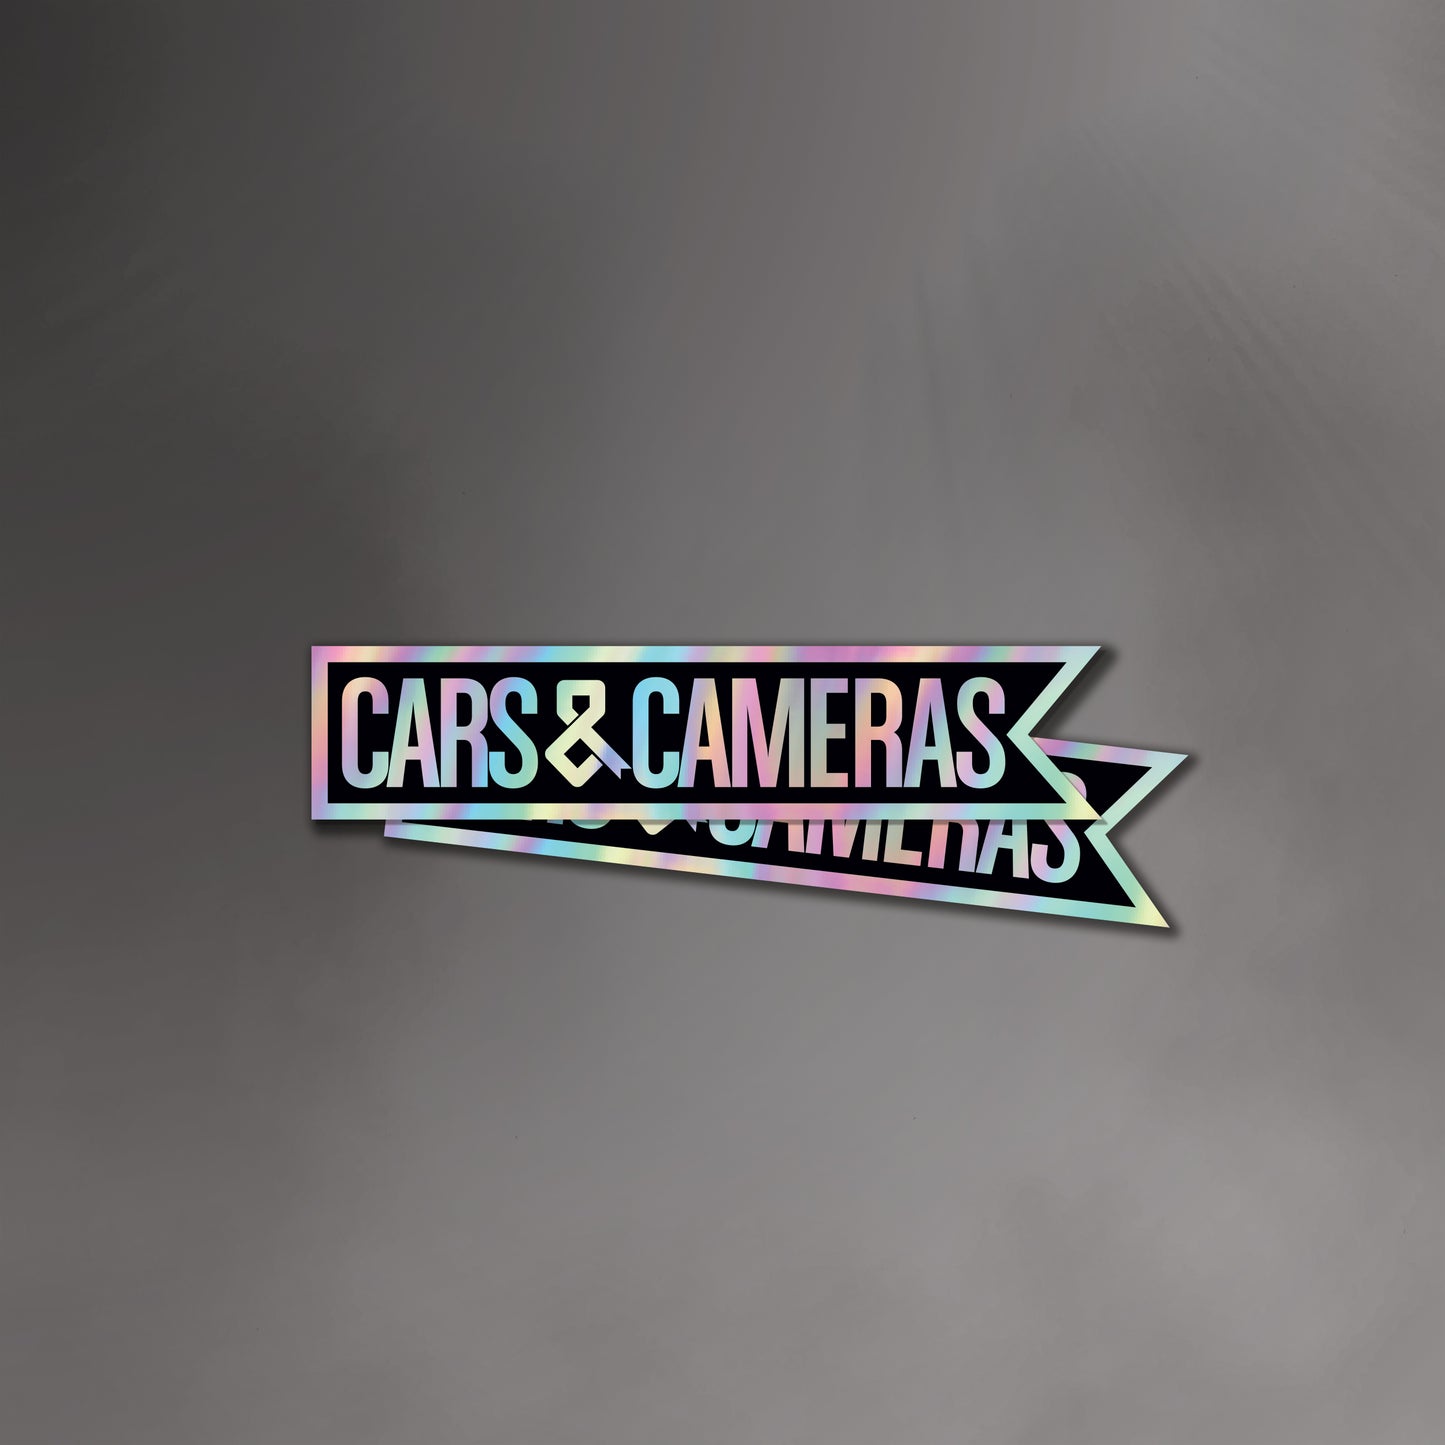 Cars & Cameras Ribbon Holographic Sticker (2-Pack)